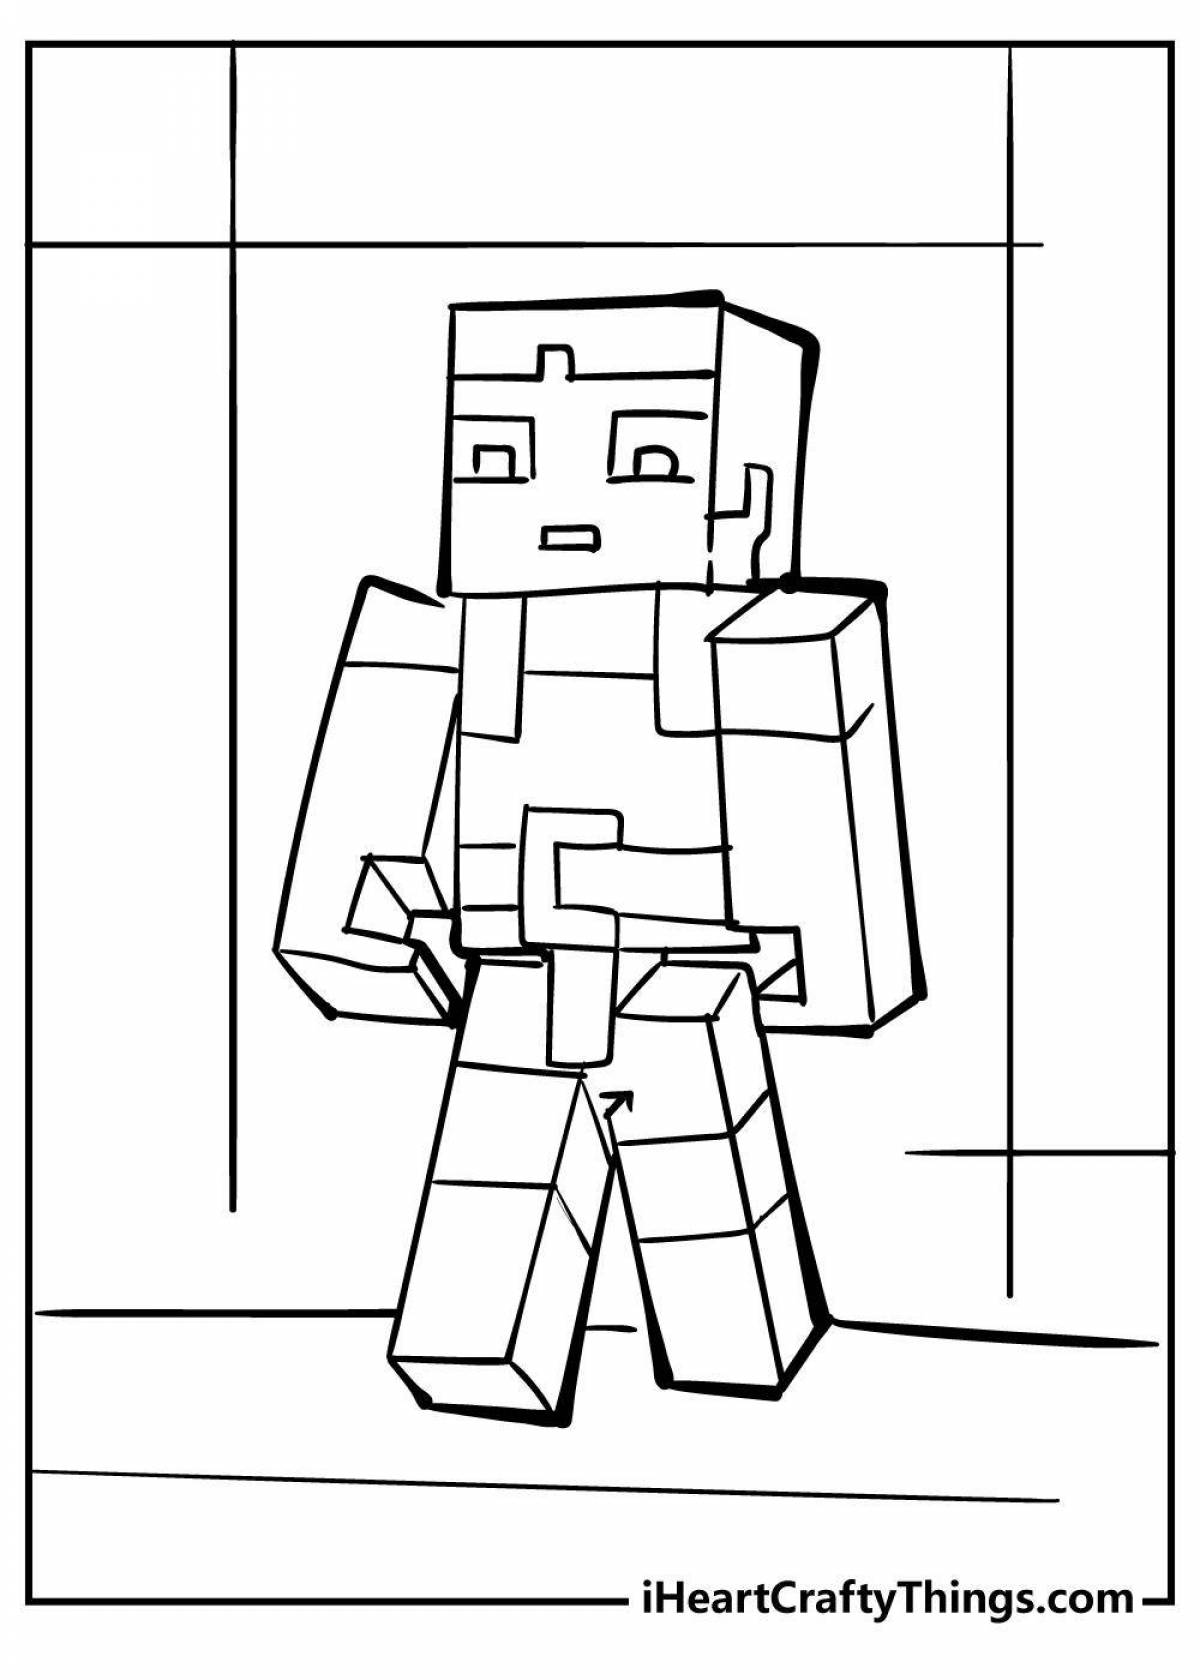 Funny minecraft heart coloring page